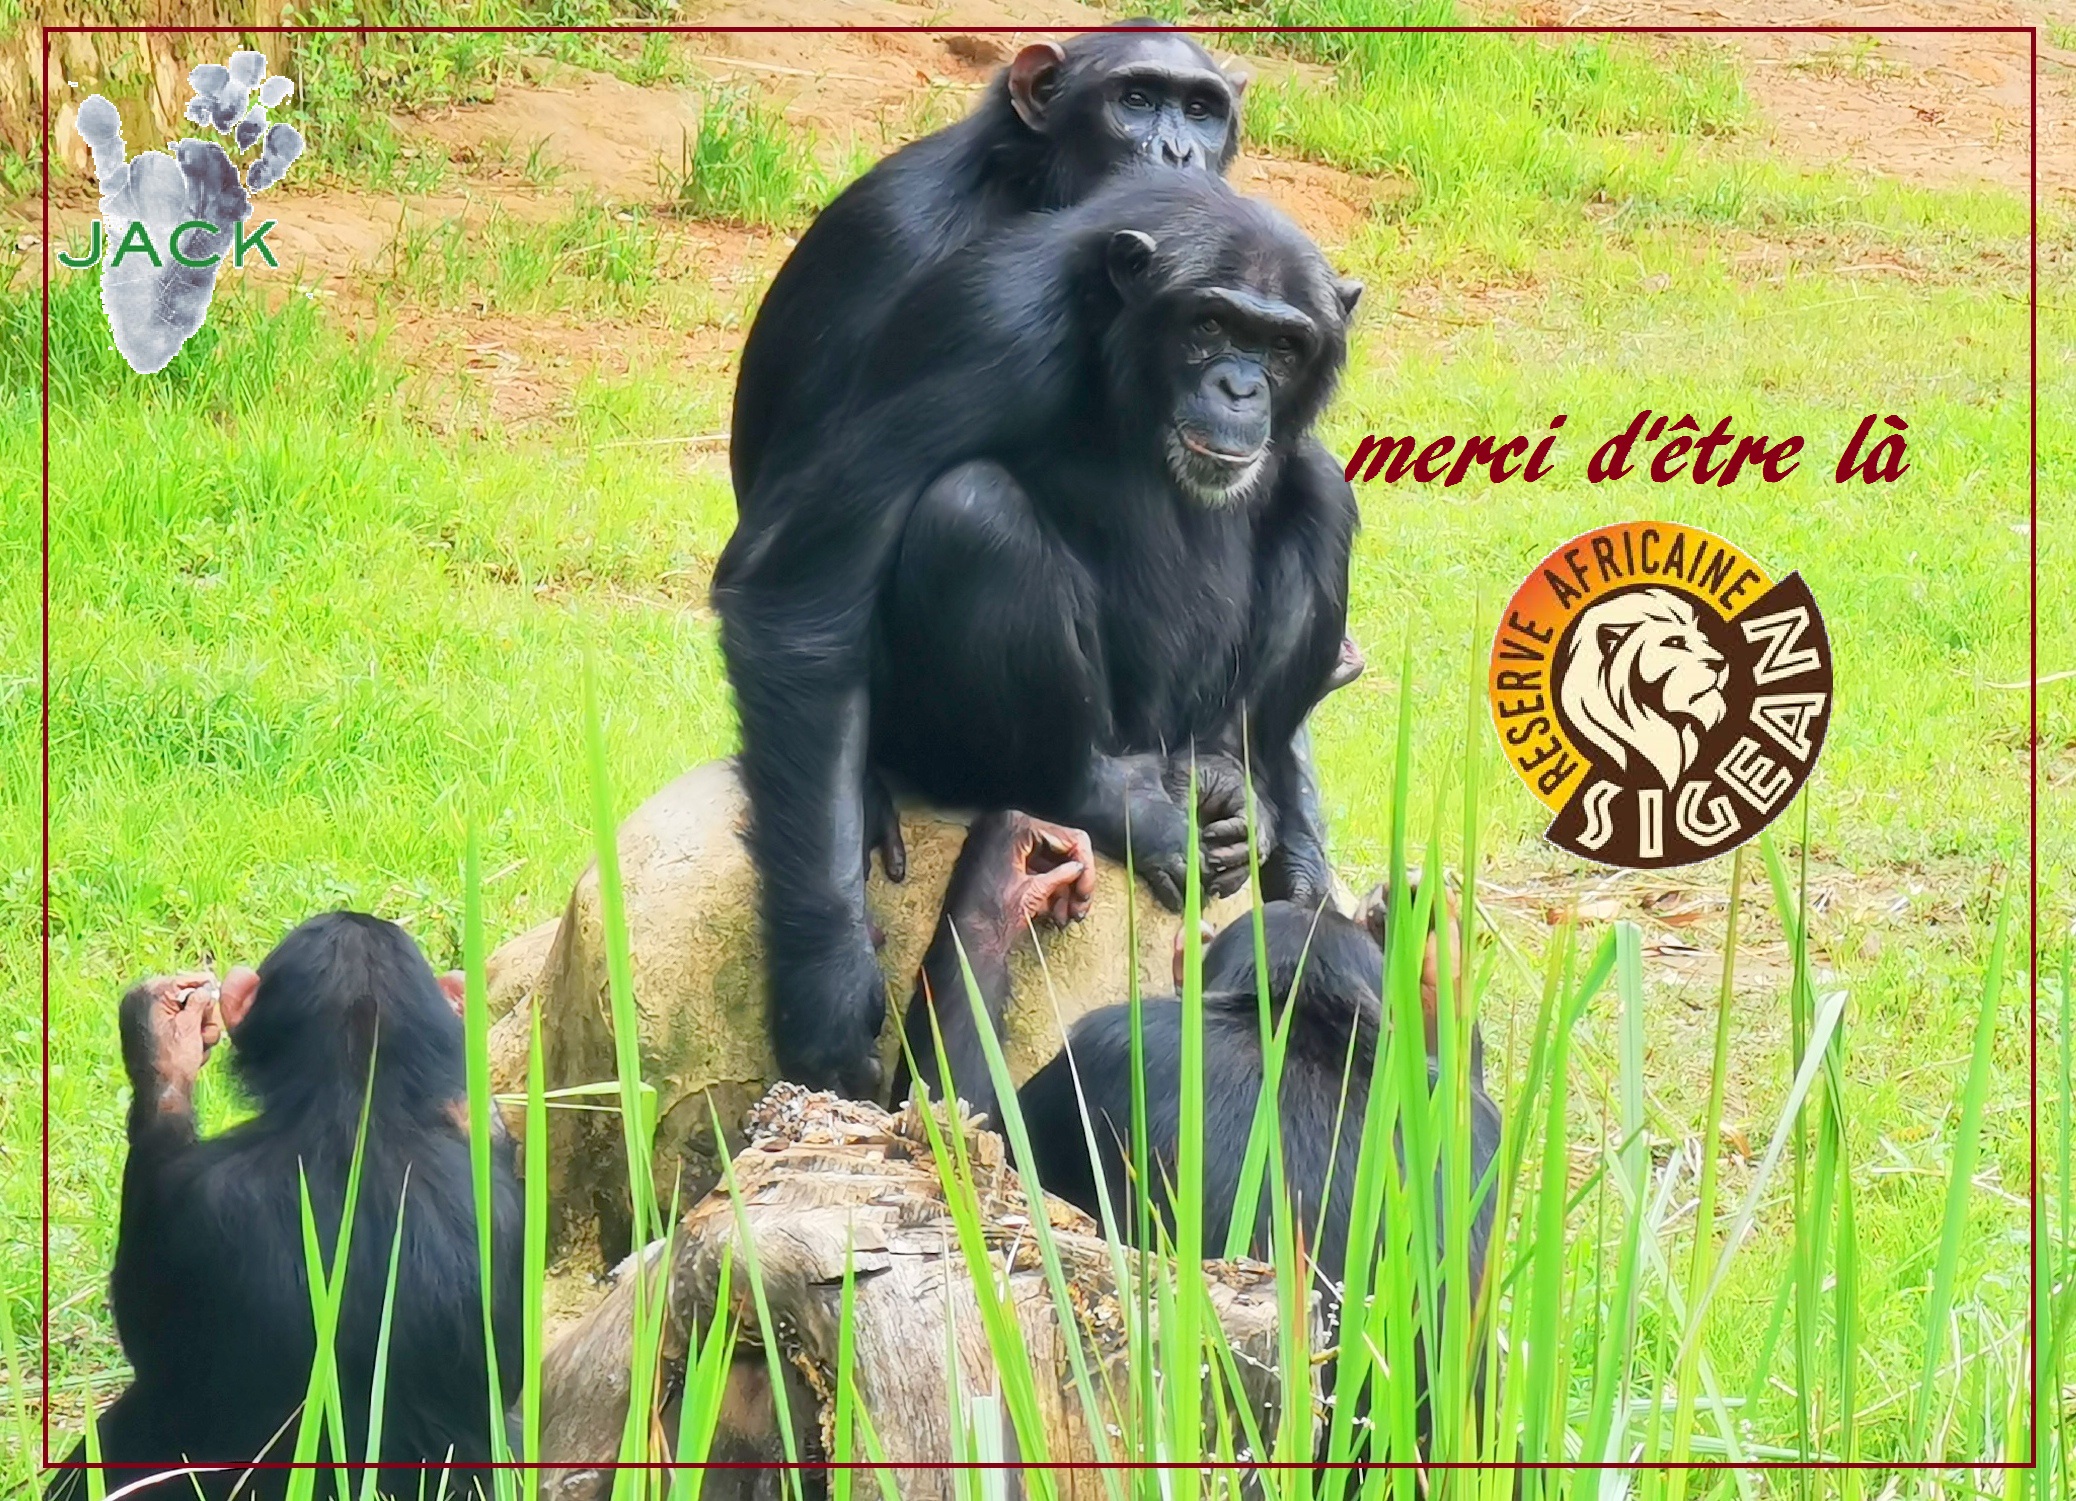 The French Reserve Africaine de Sigean supports chimp & monkey building projects